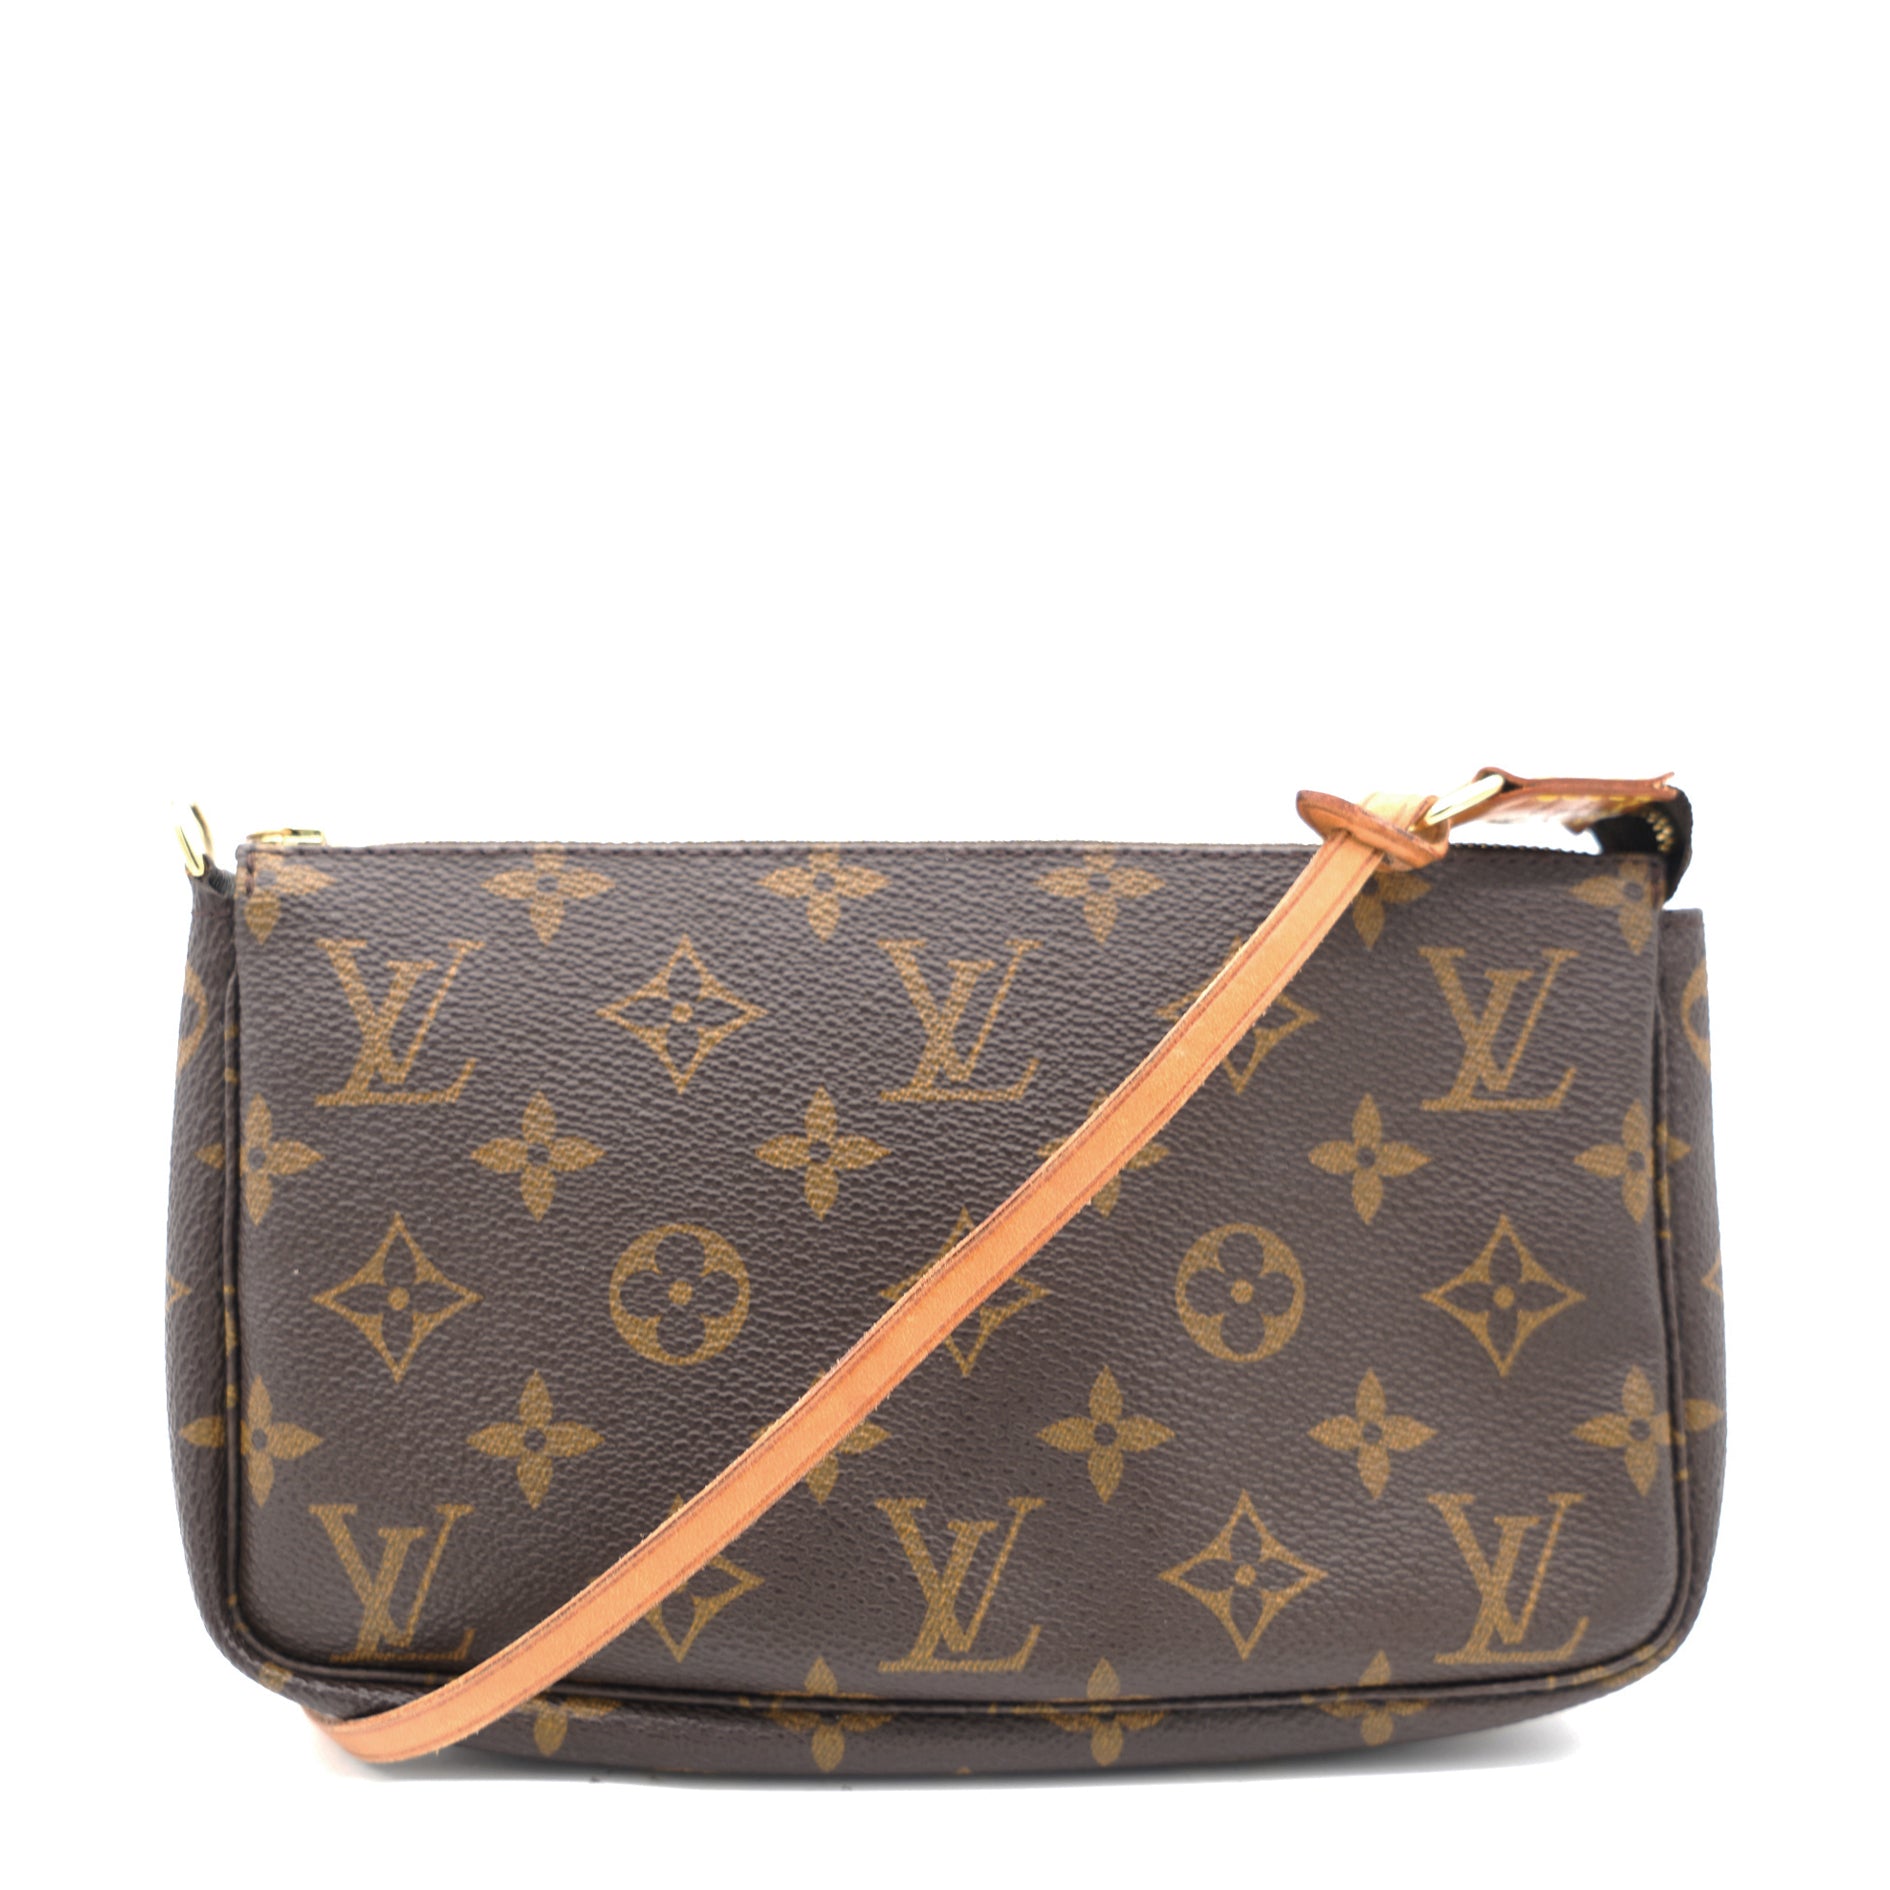 Louis Vuitton - Authenticated  Handbag - Leather Brown for Women, Very Good Condition